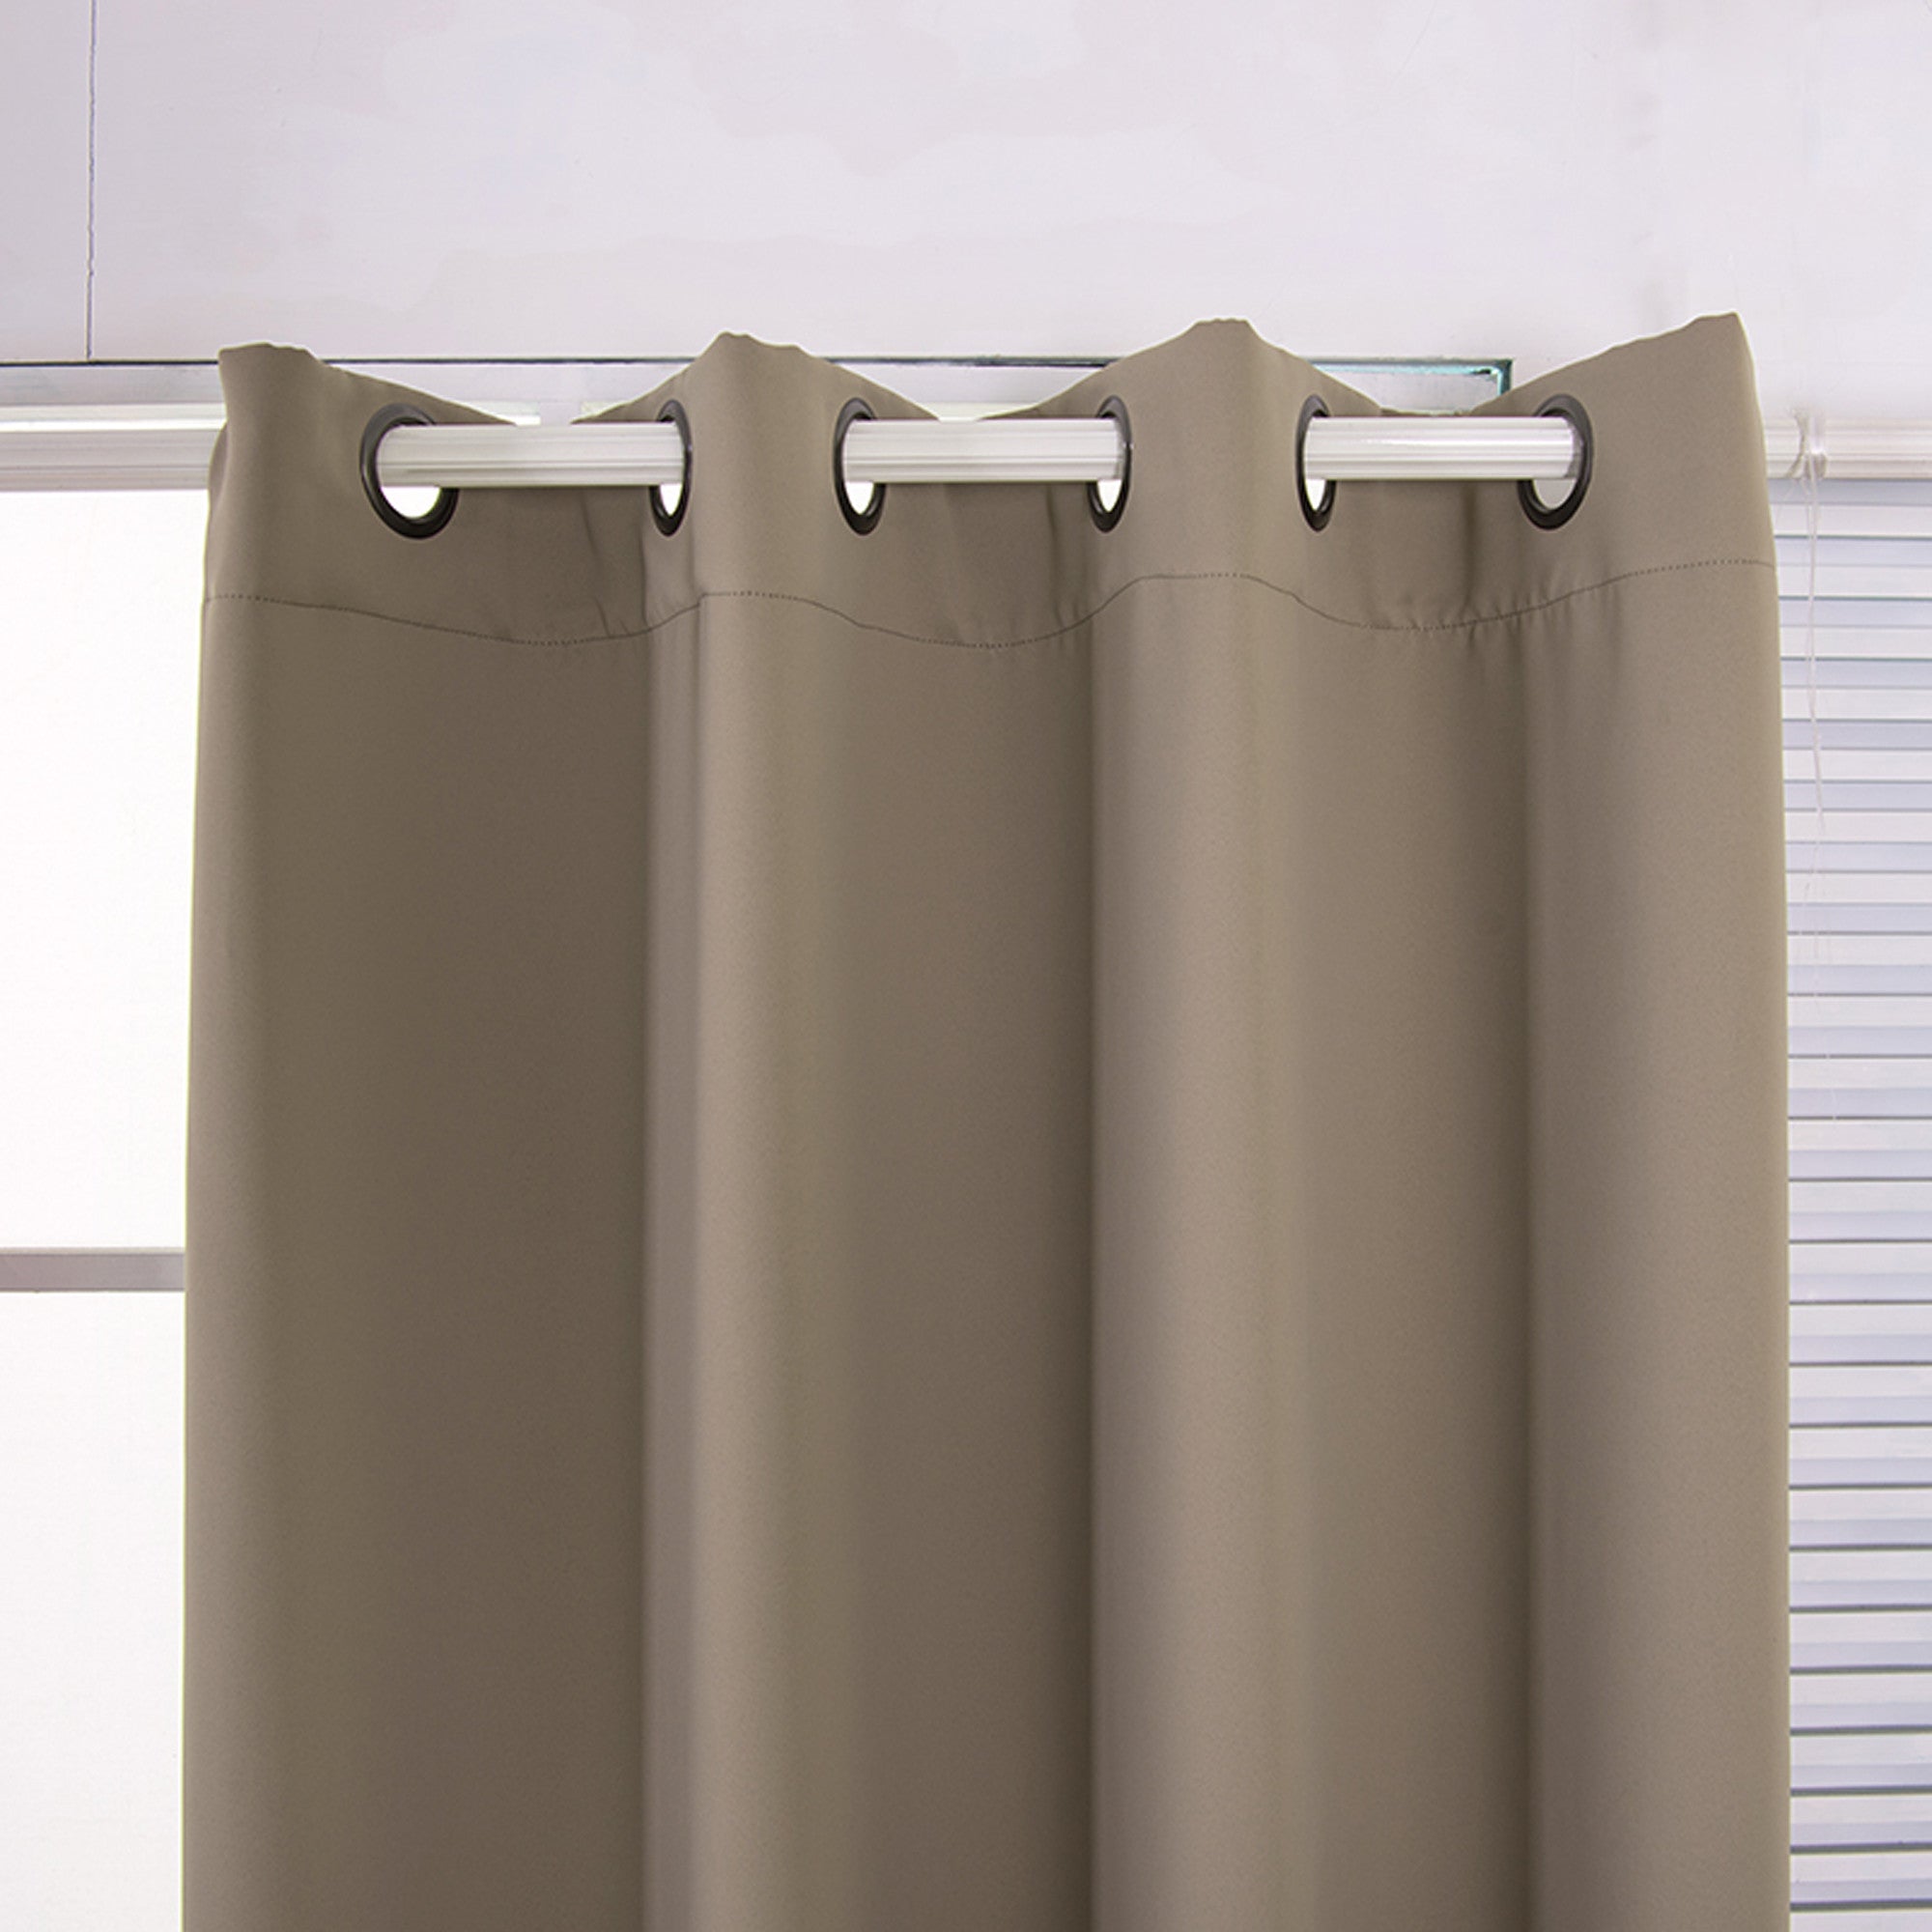 Teamson Home 96" Ephesus Insulated Thermal Blackout Grommet Window Panels with Grommets, Sepia Brown